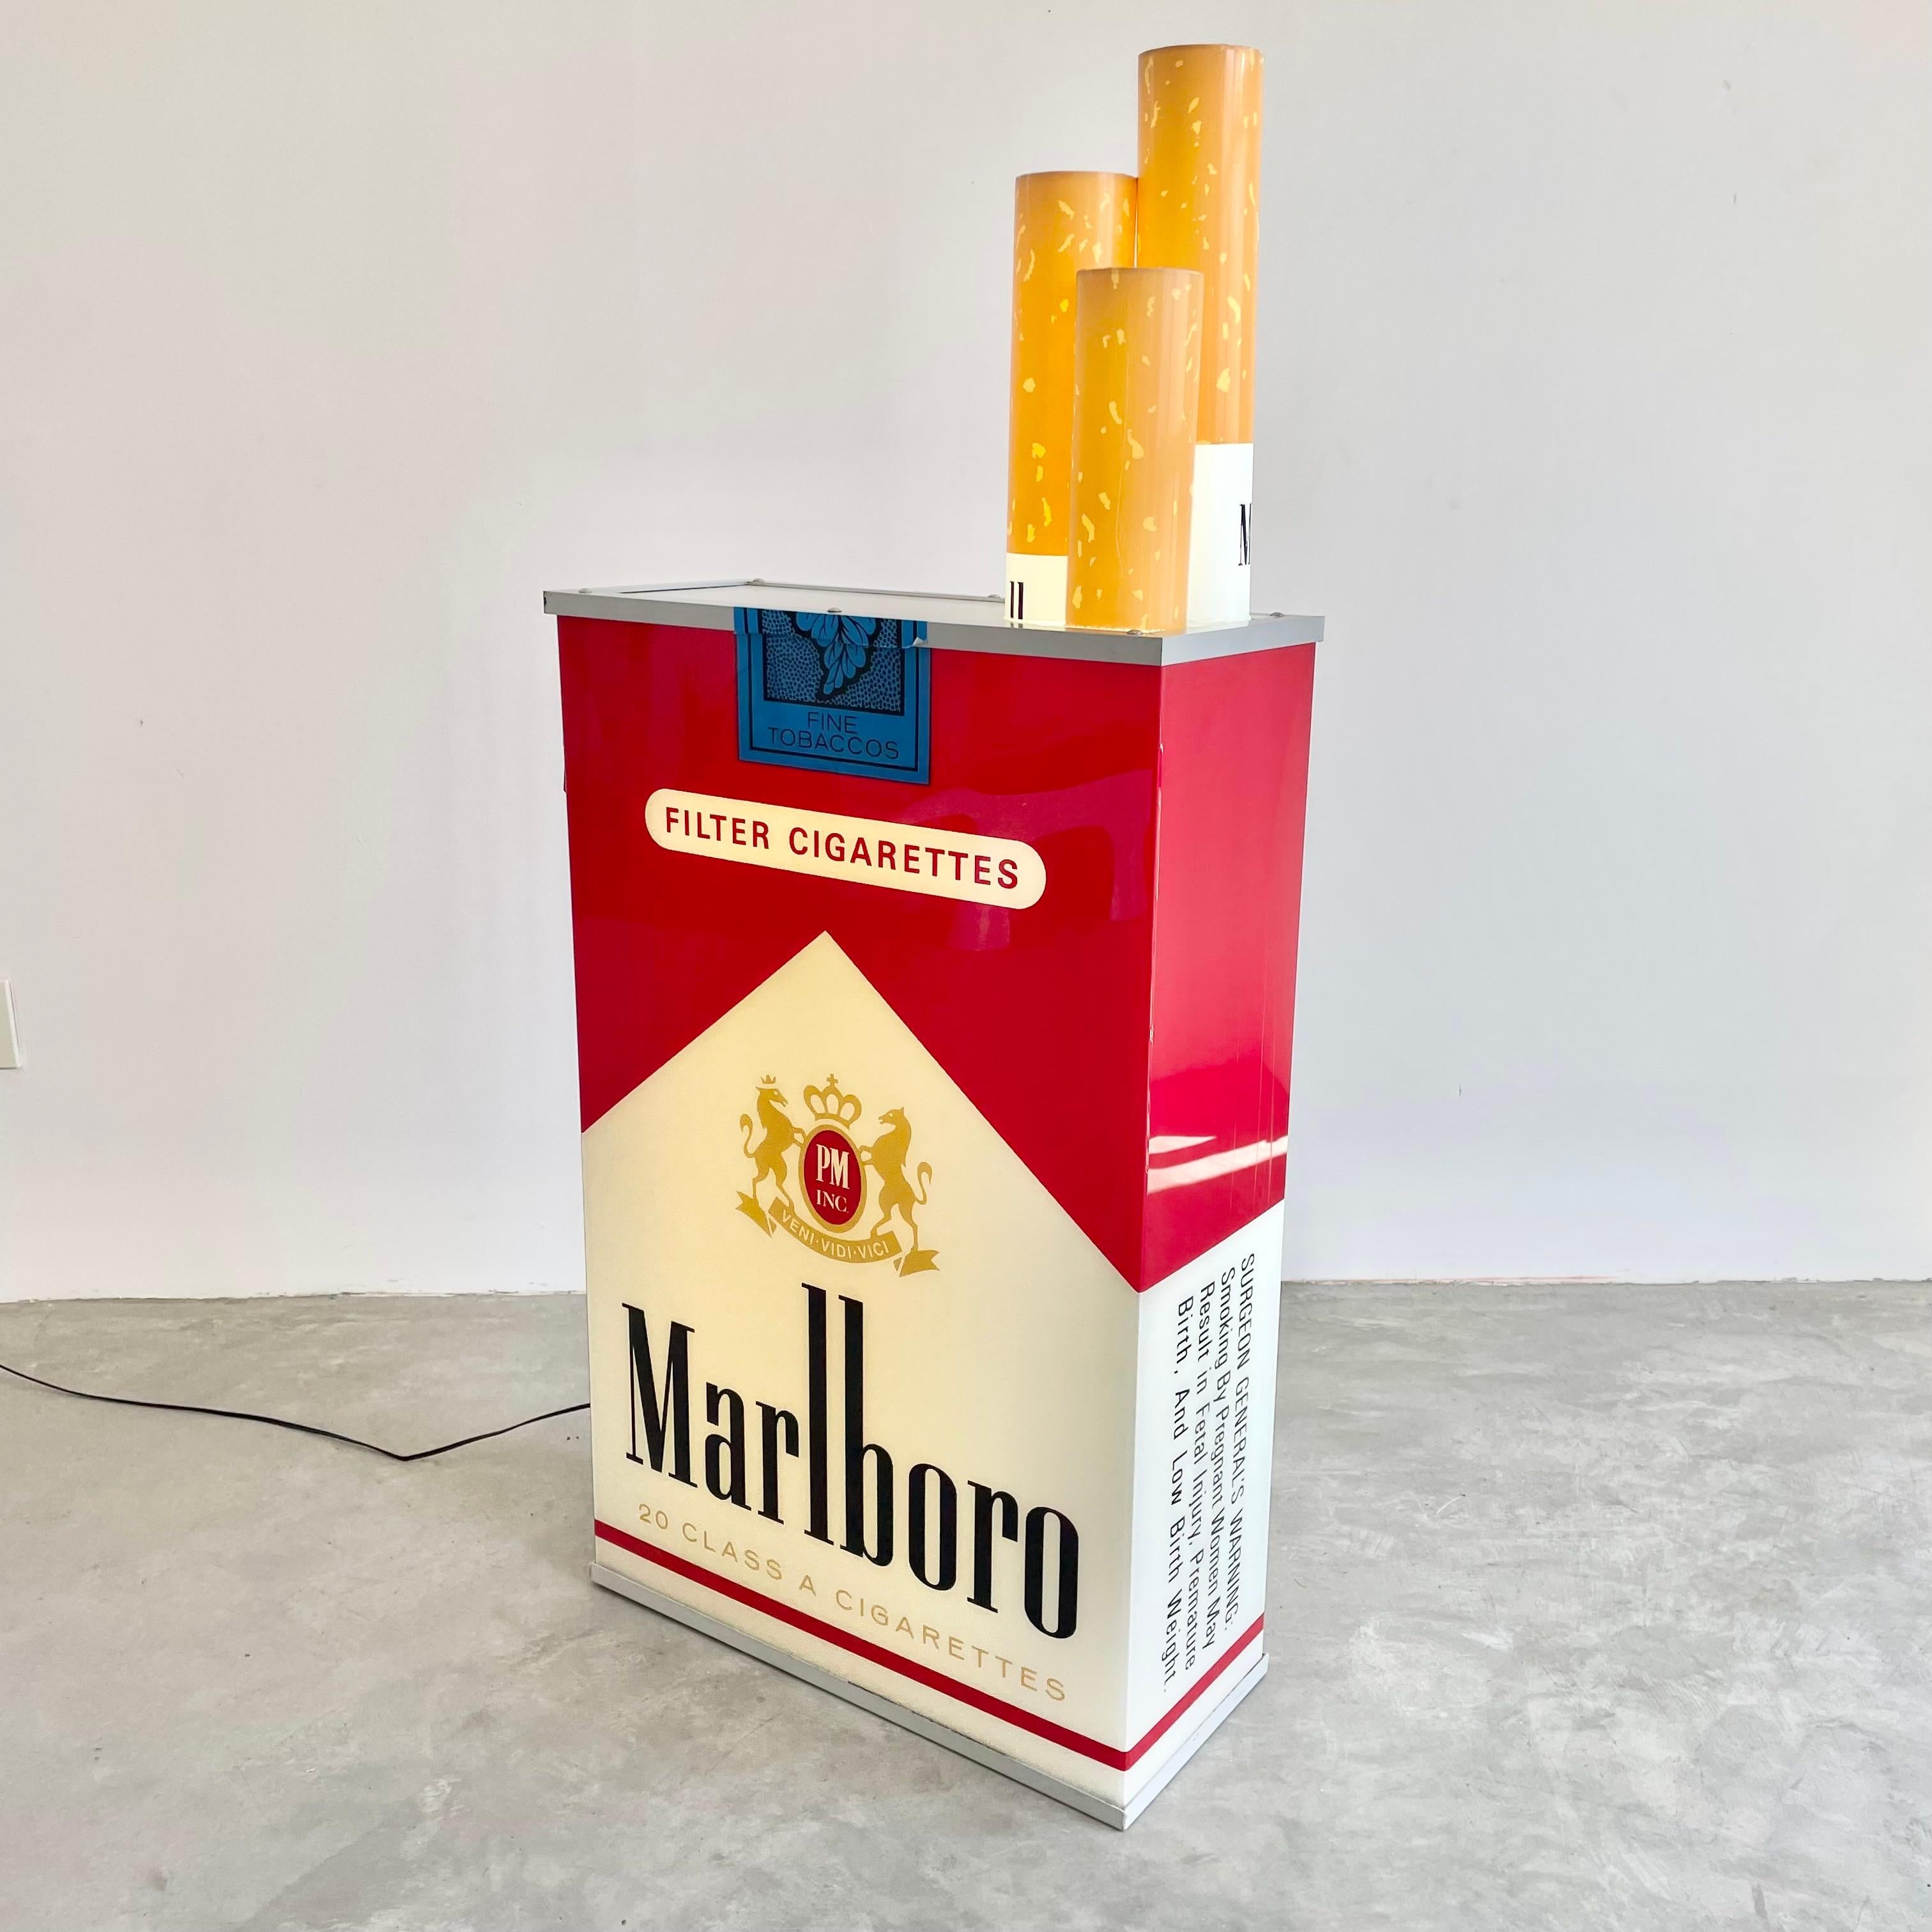 Fantastic vintage advertising light up box by Marlboro. Massive scale. Double sided. Excellent condition. Looks great hanging on the wall or on the ground. Acrylic sides and cigarettes with metal frame. Electrical works perfectly. Newly rewired.